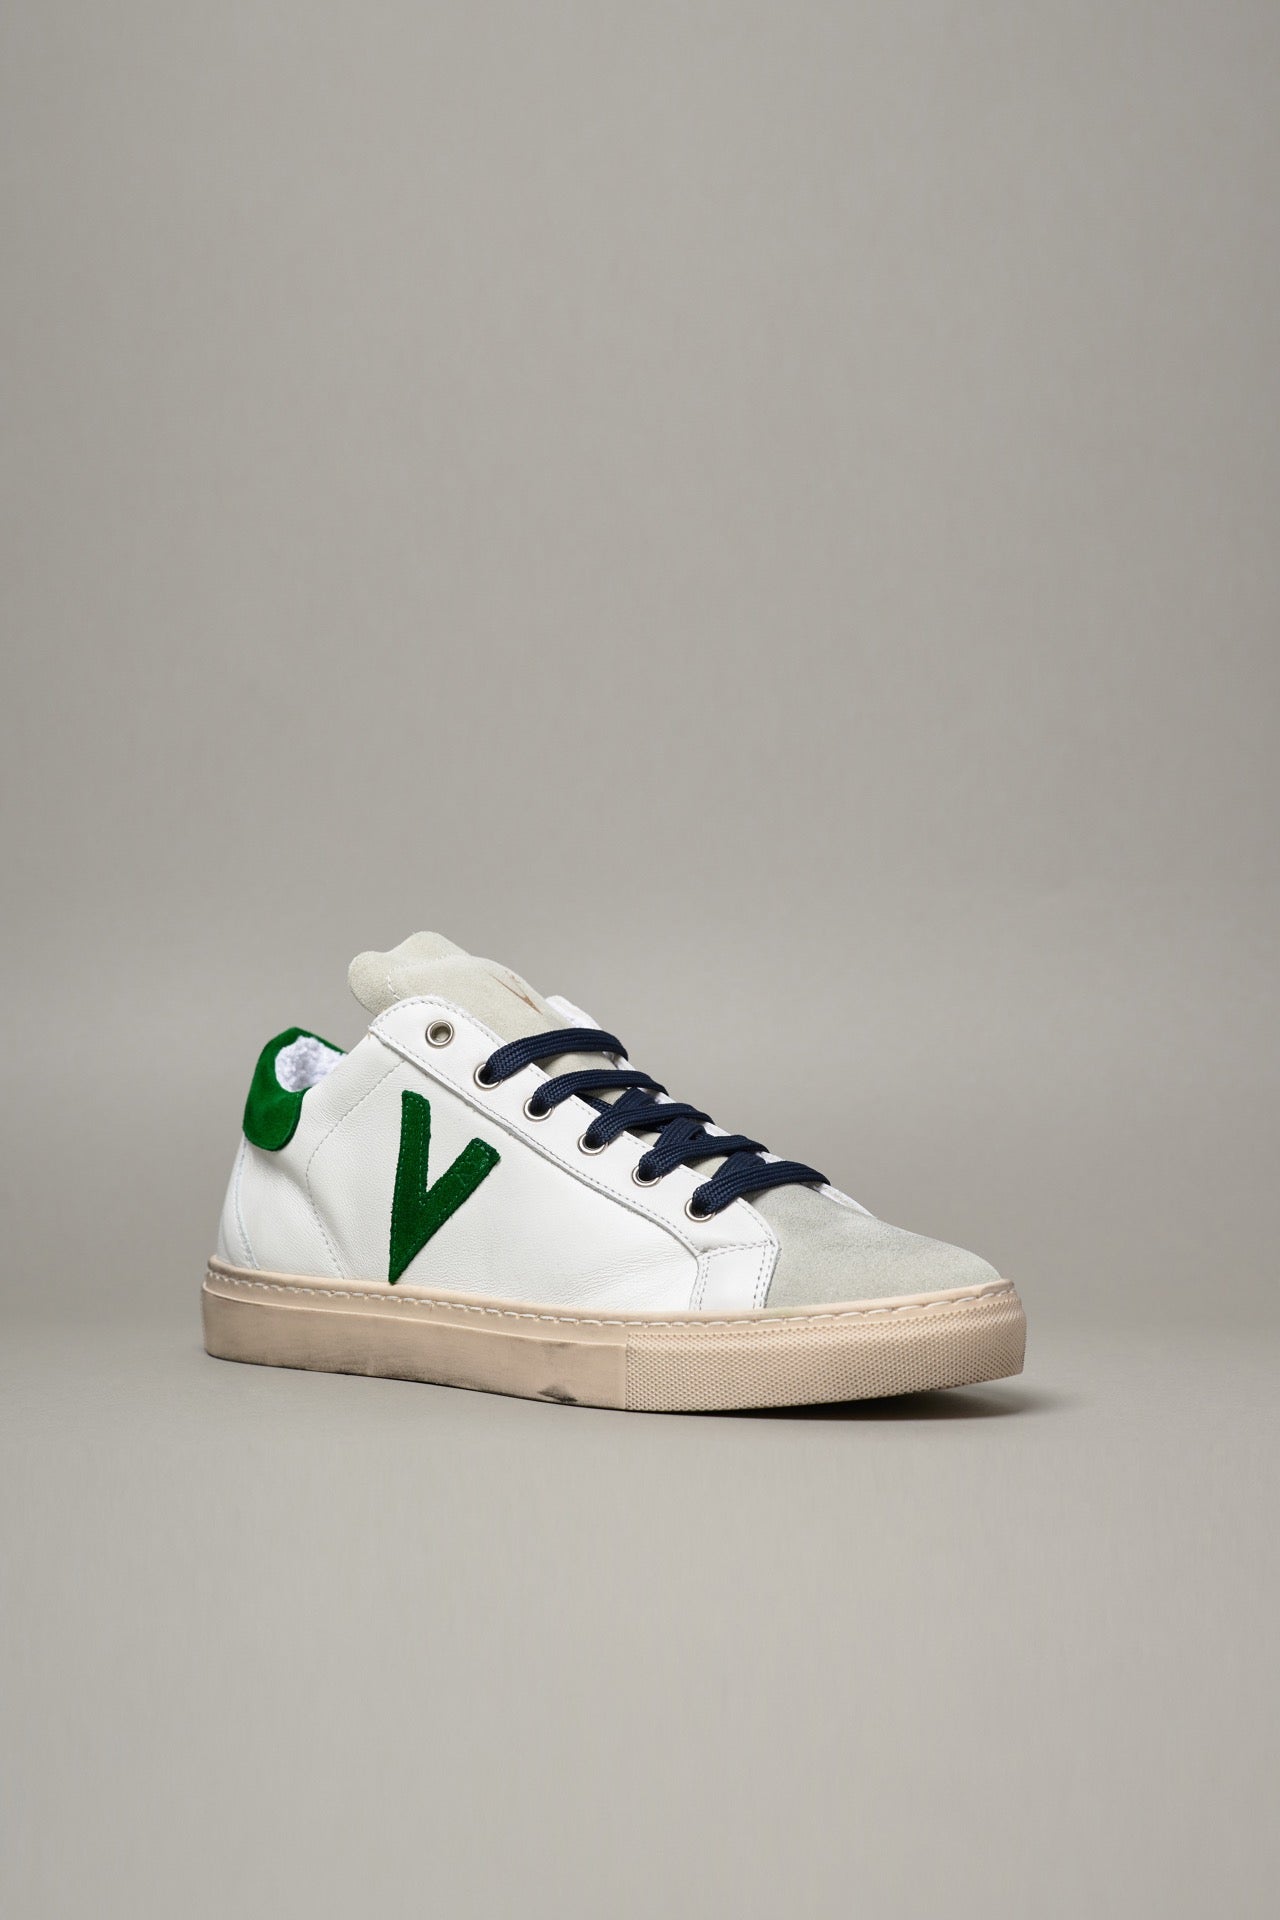 OLYMPIC - White low sole sneakers with Green suede back and insert and Blue laces